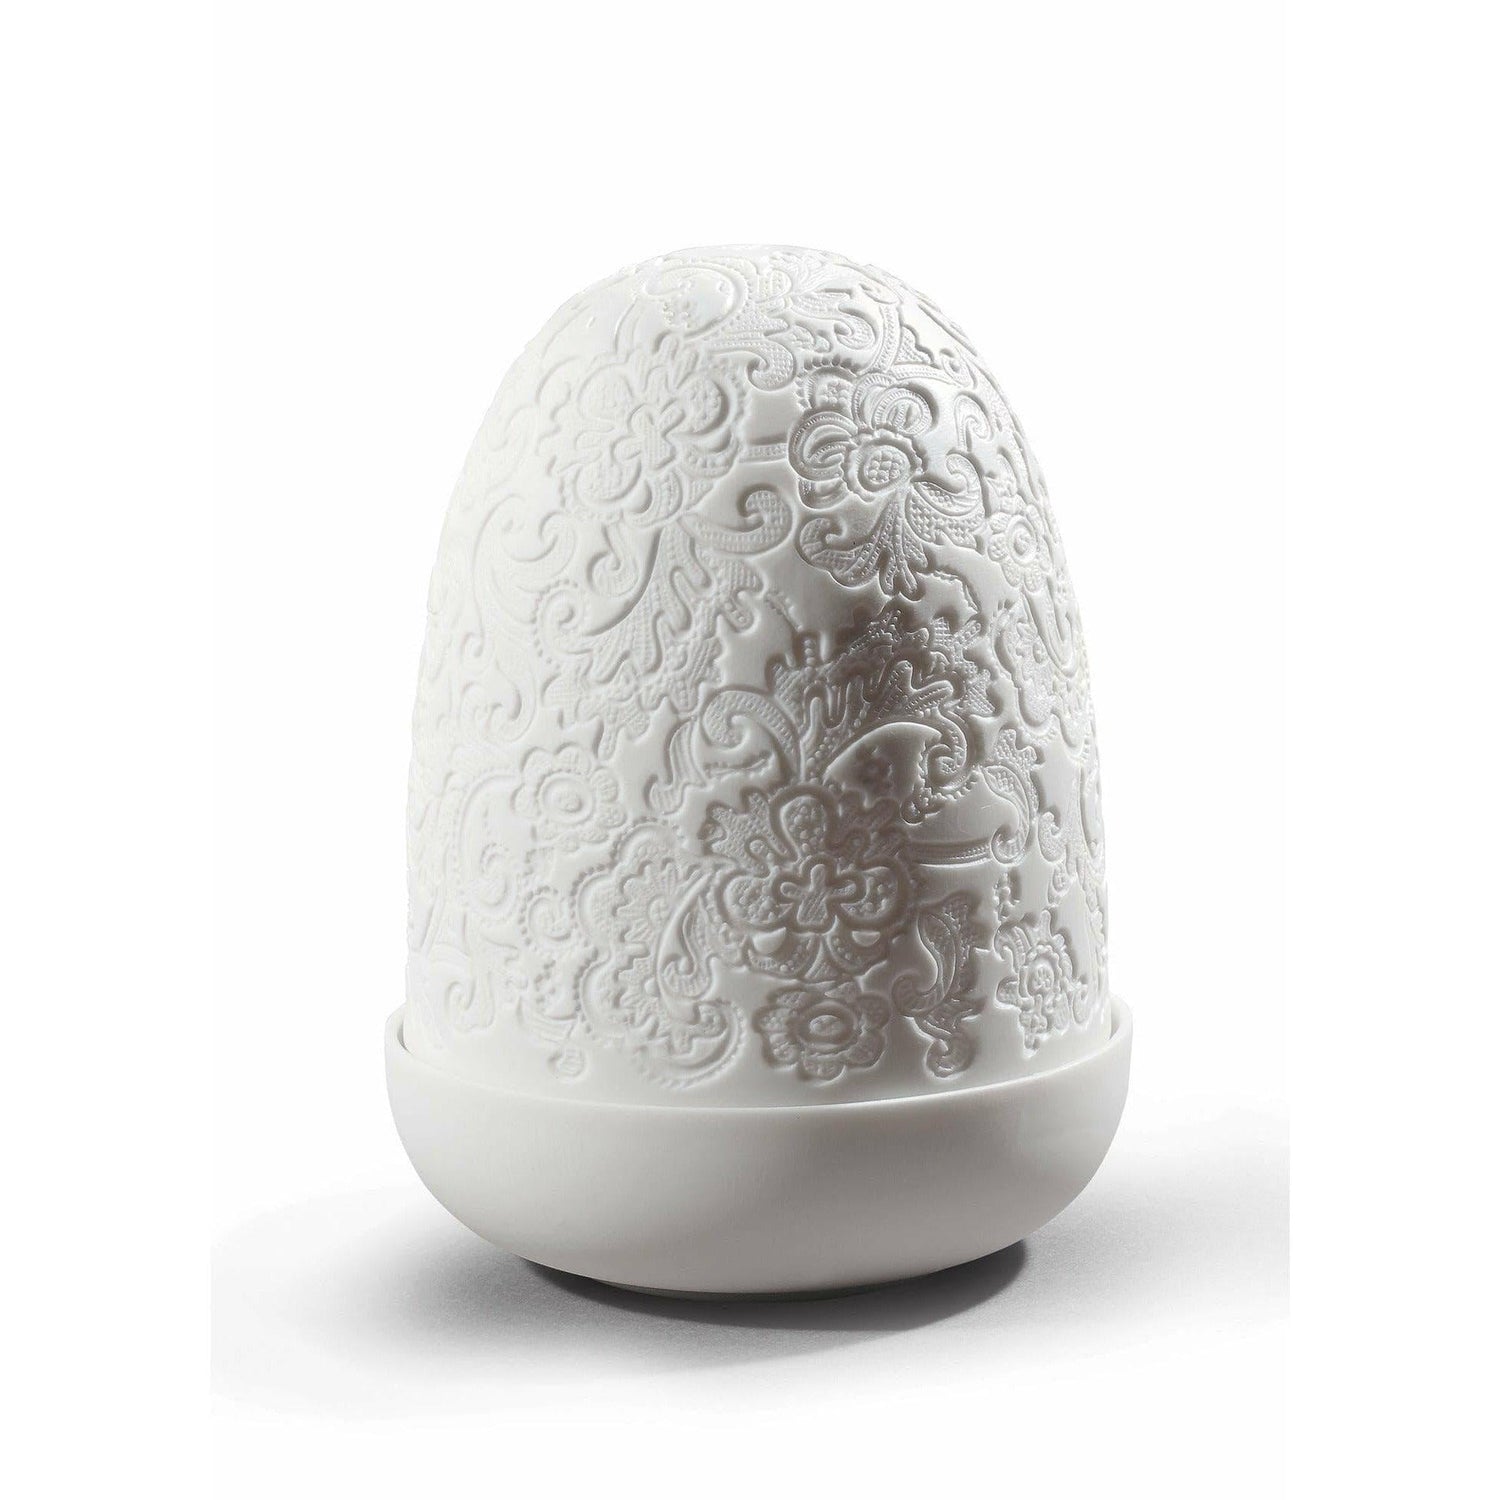 Lladro - Lace Dome Table Lamp - 01023890 | Montreal Lighting & Hardware